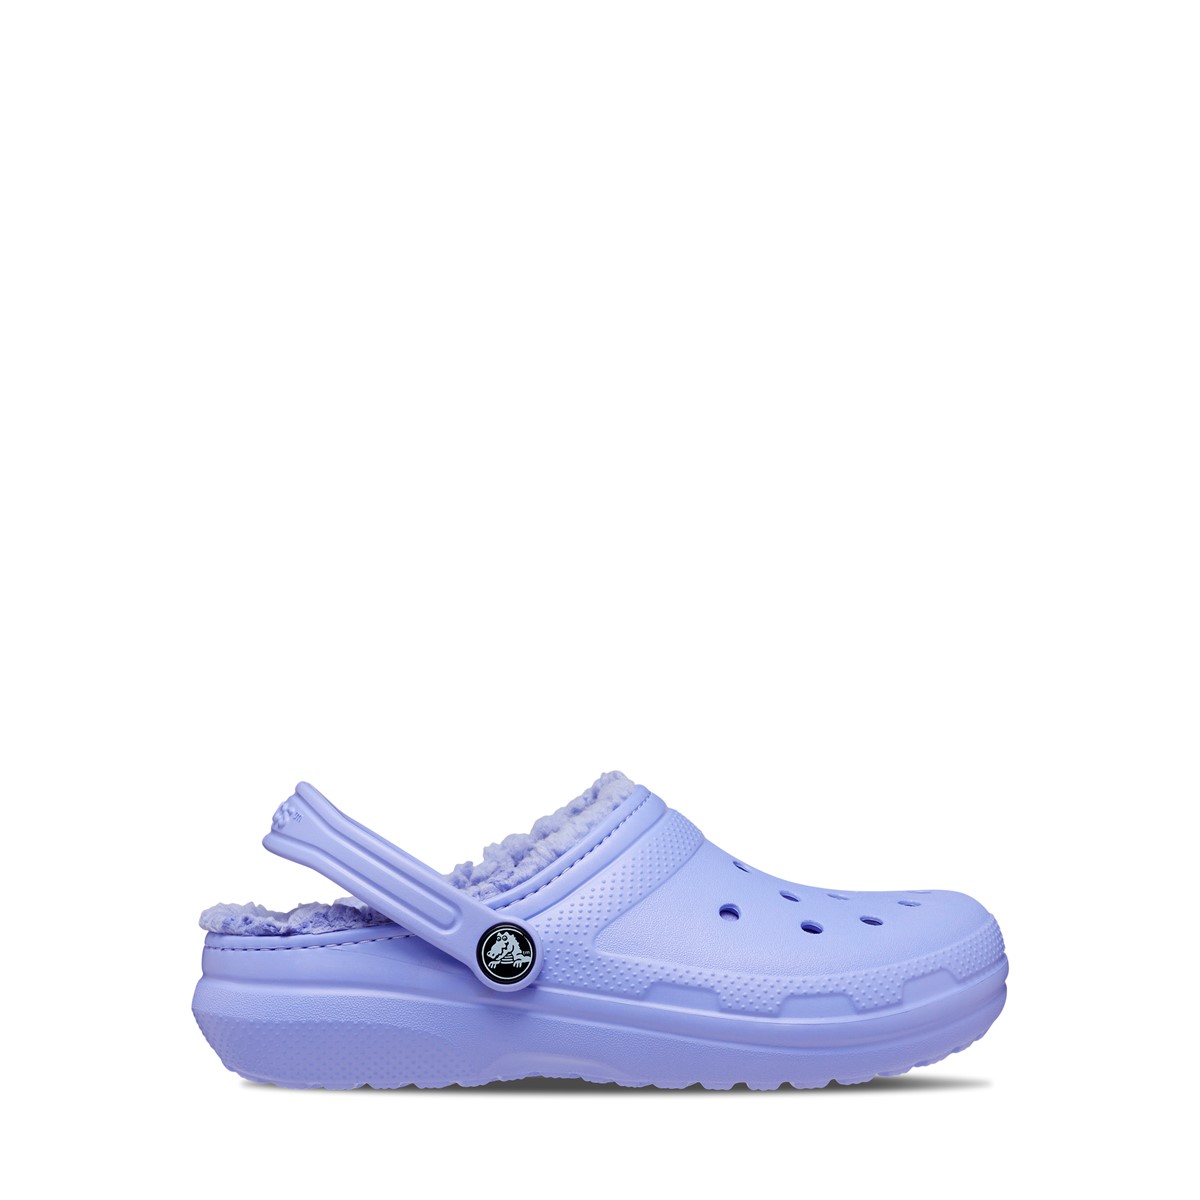 Little Kids' Classic Lined Clogs in Violet